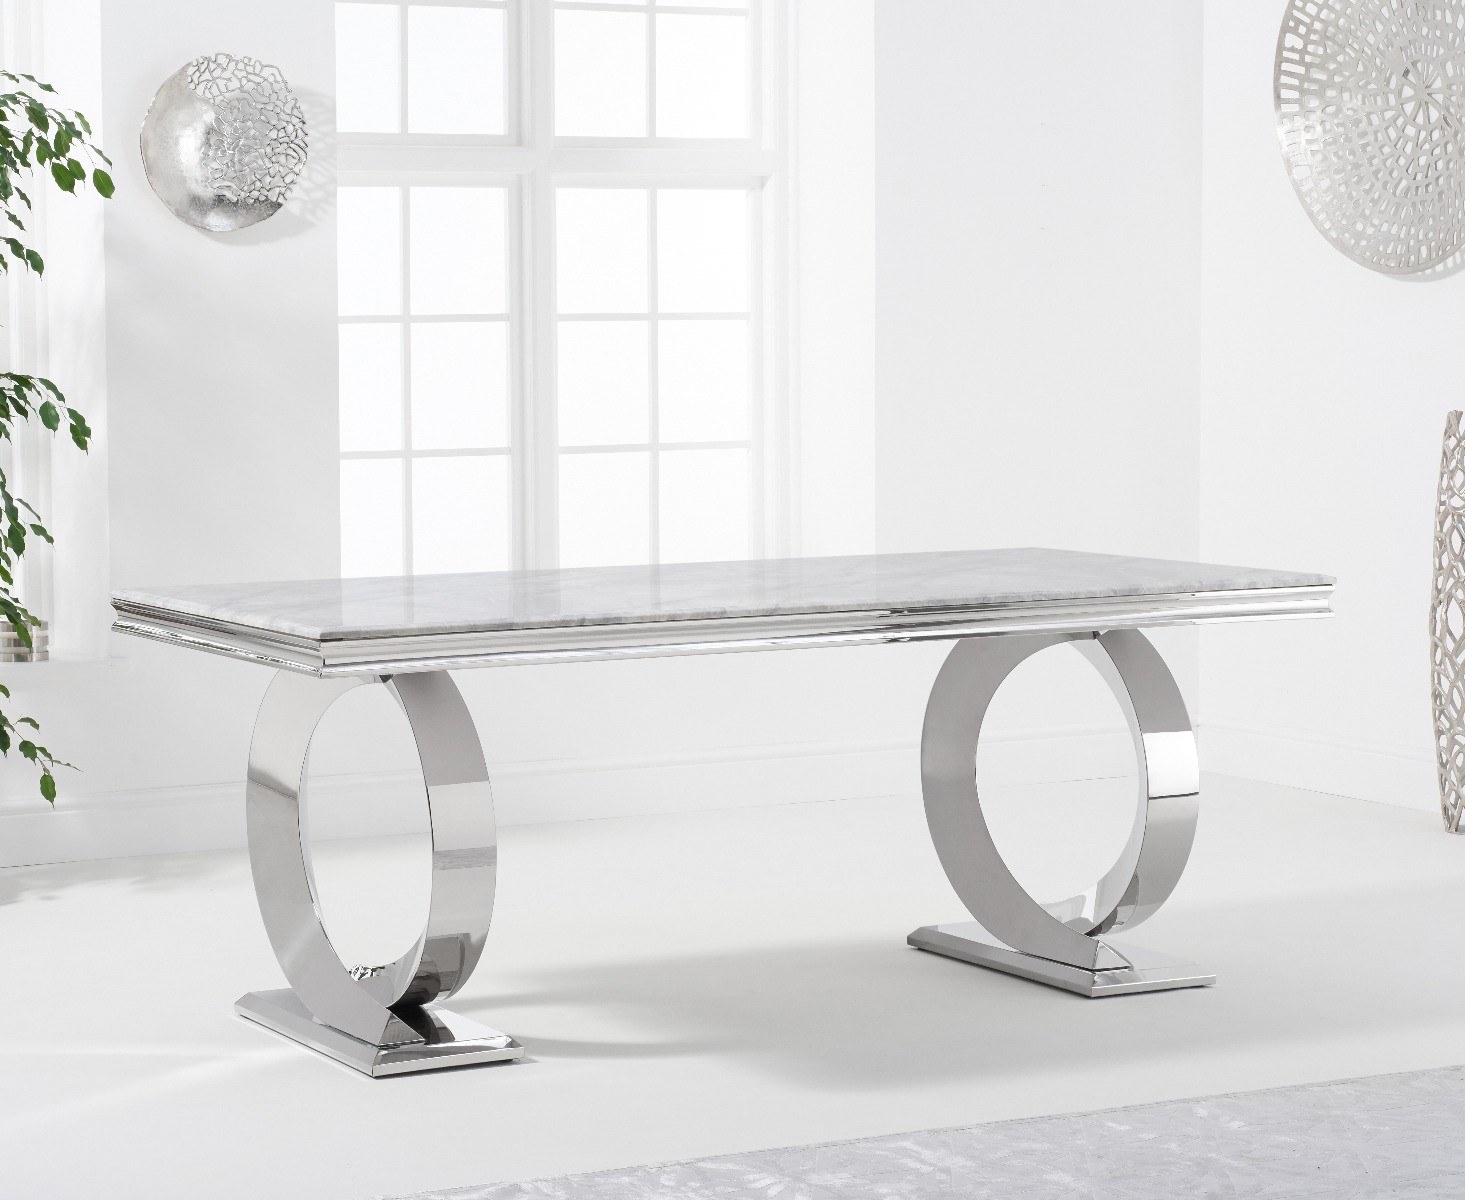 Photo 1 of Fabio 200cm marble dining table